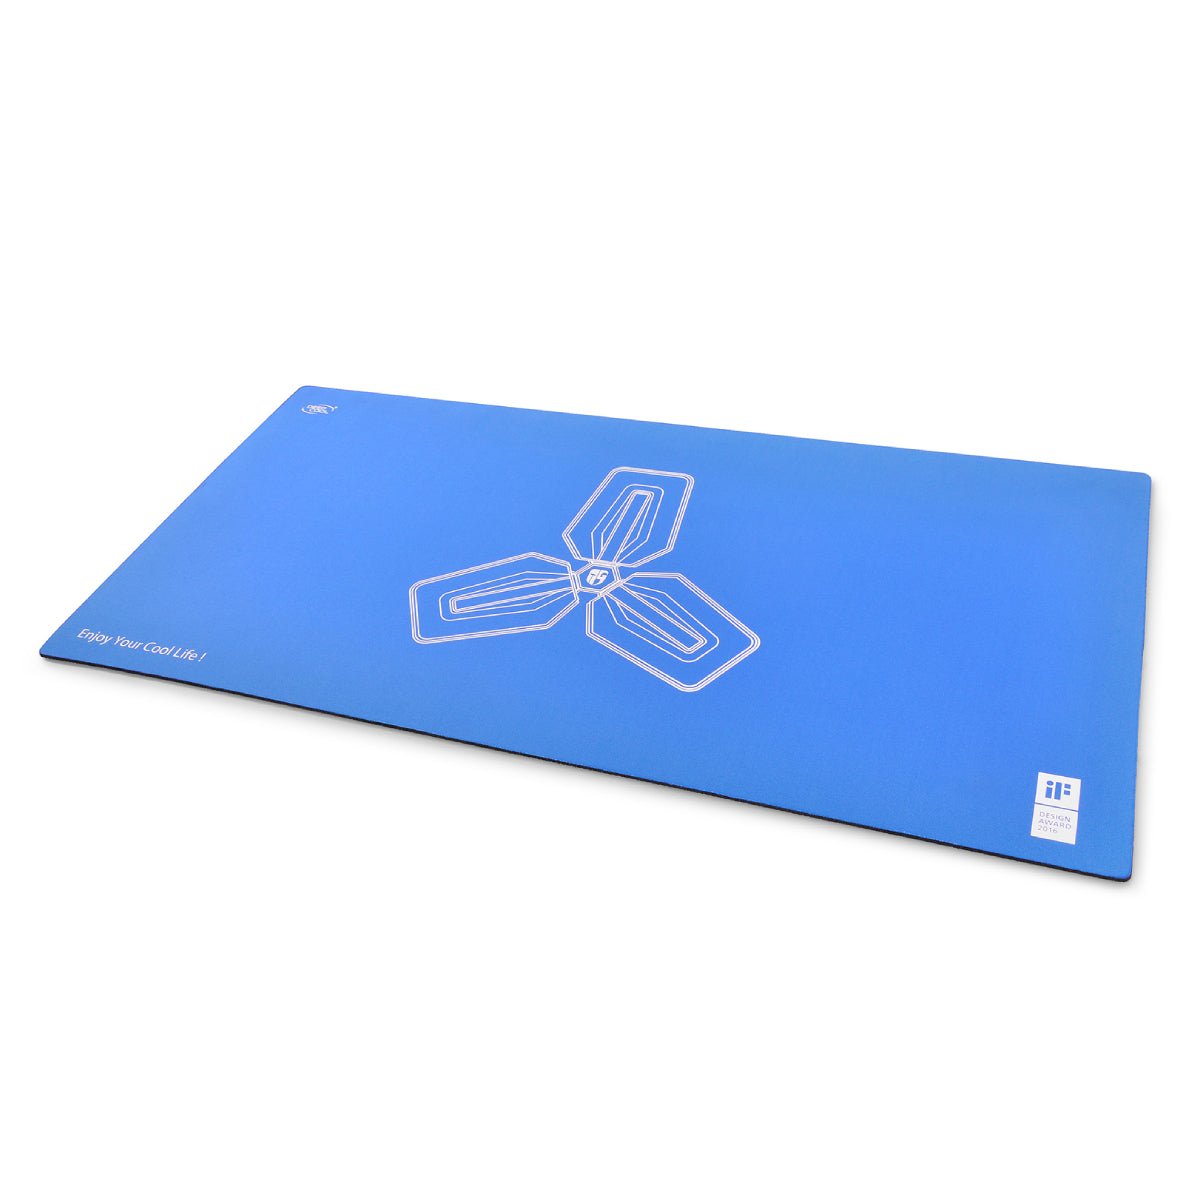 DeepCool D-Pad Gaming Mouse Mat - Large - Store 974 | ستور ٩٧٤